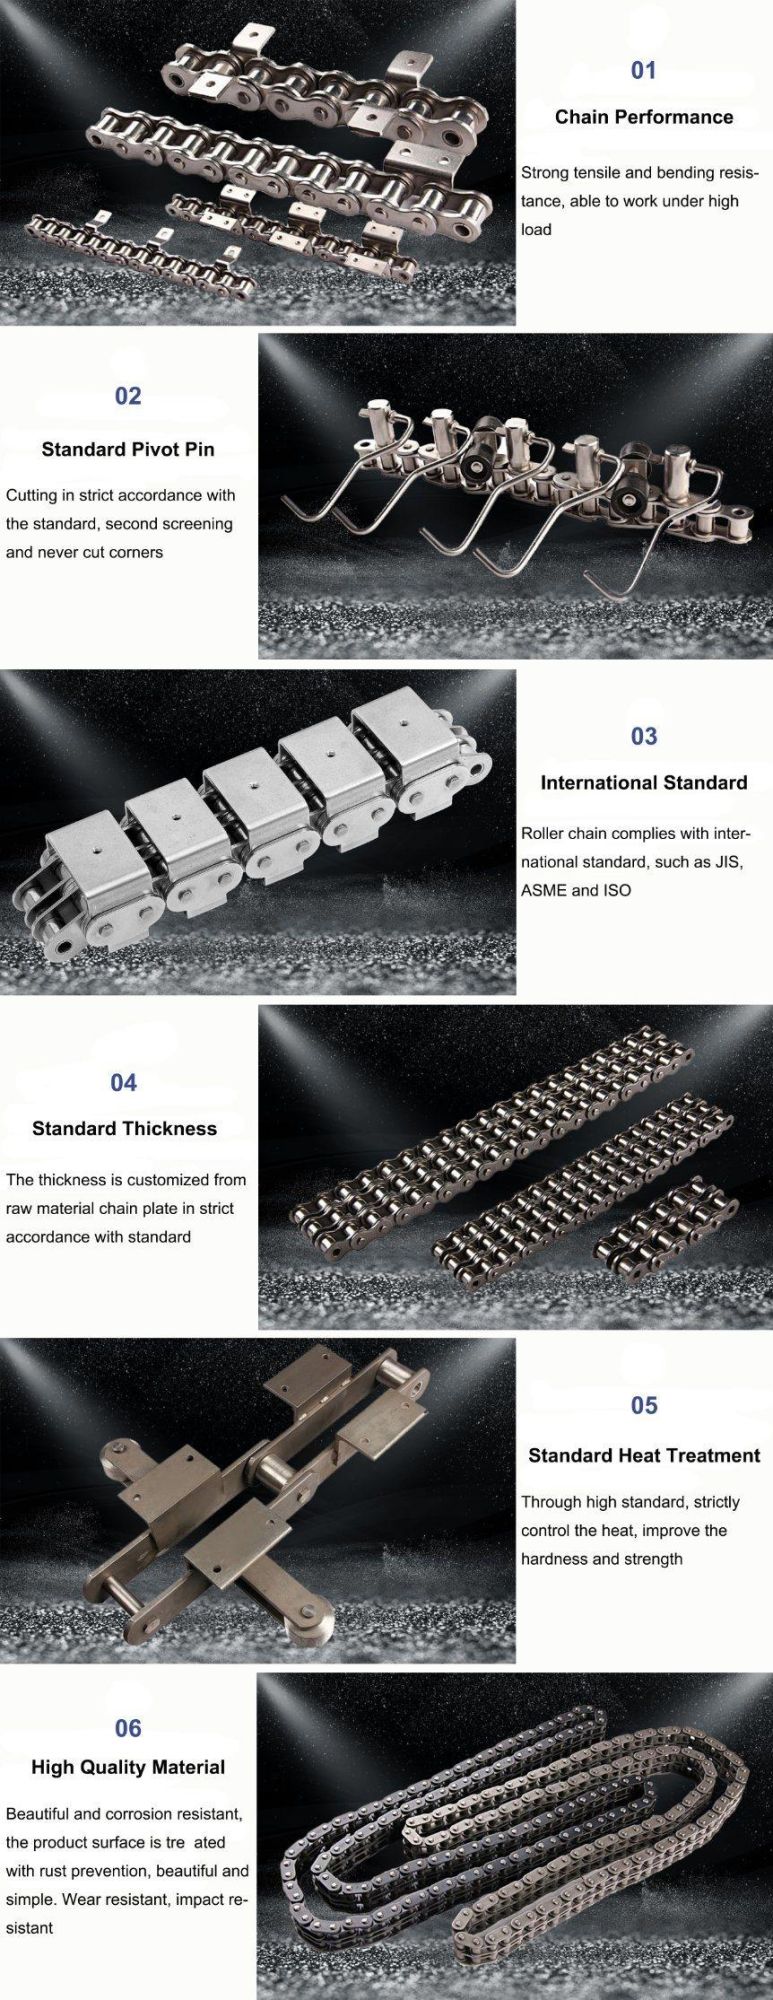 304 Series Stainless Steel Welded Flat Top Transmission Conveyor Roller Chain